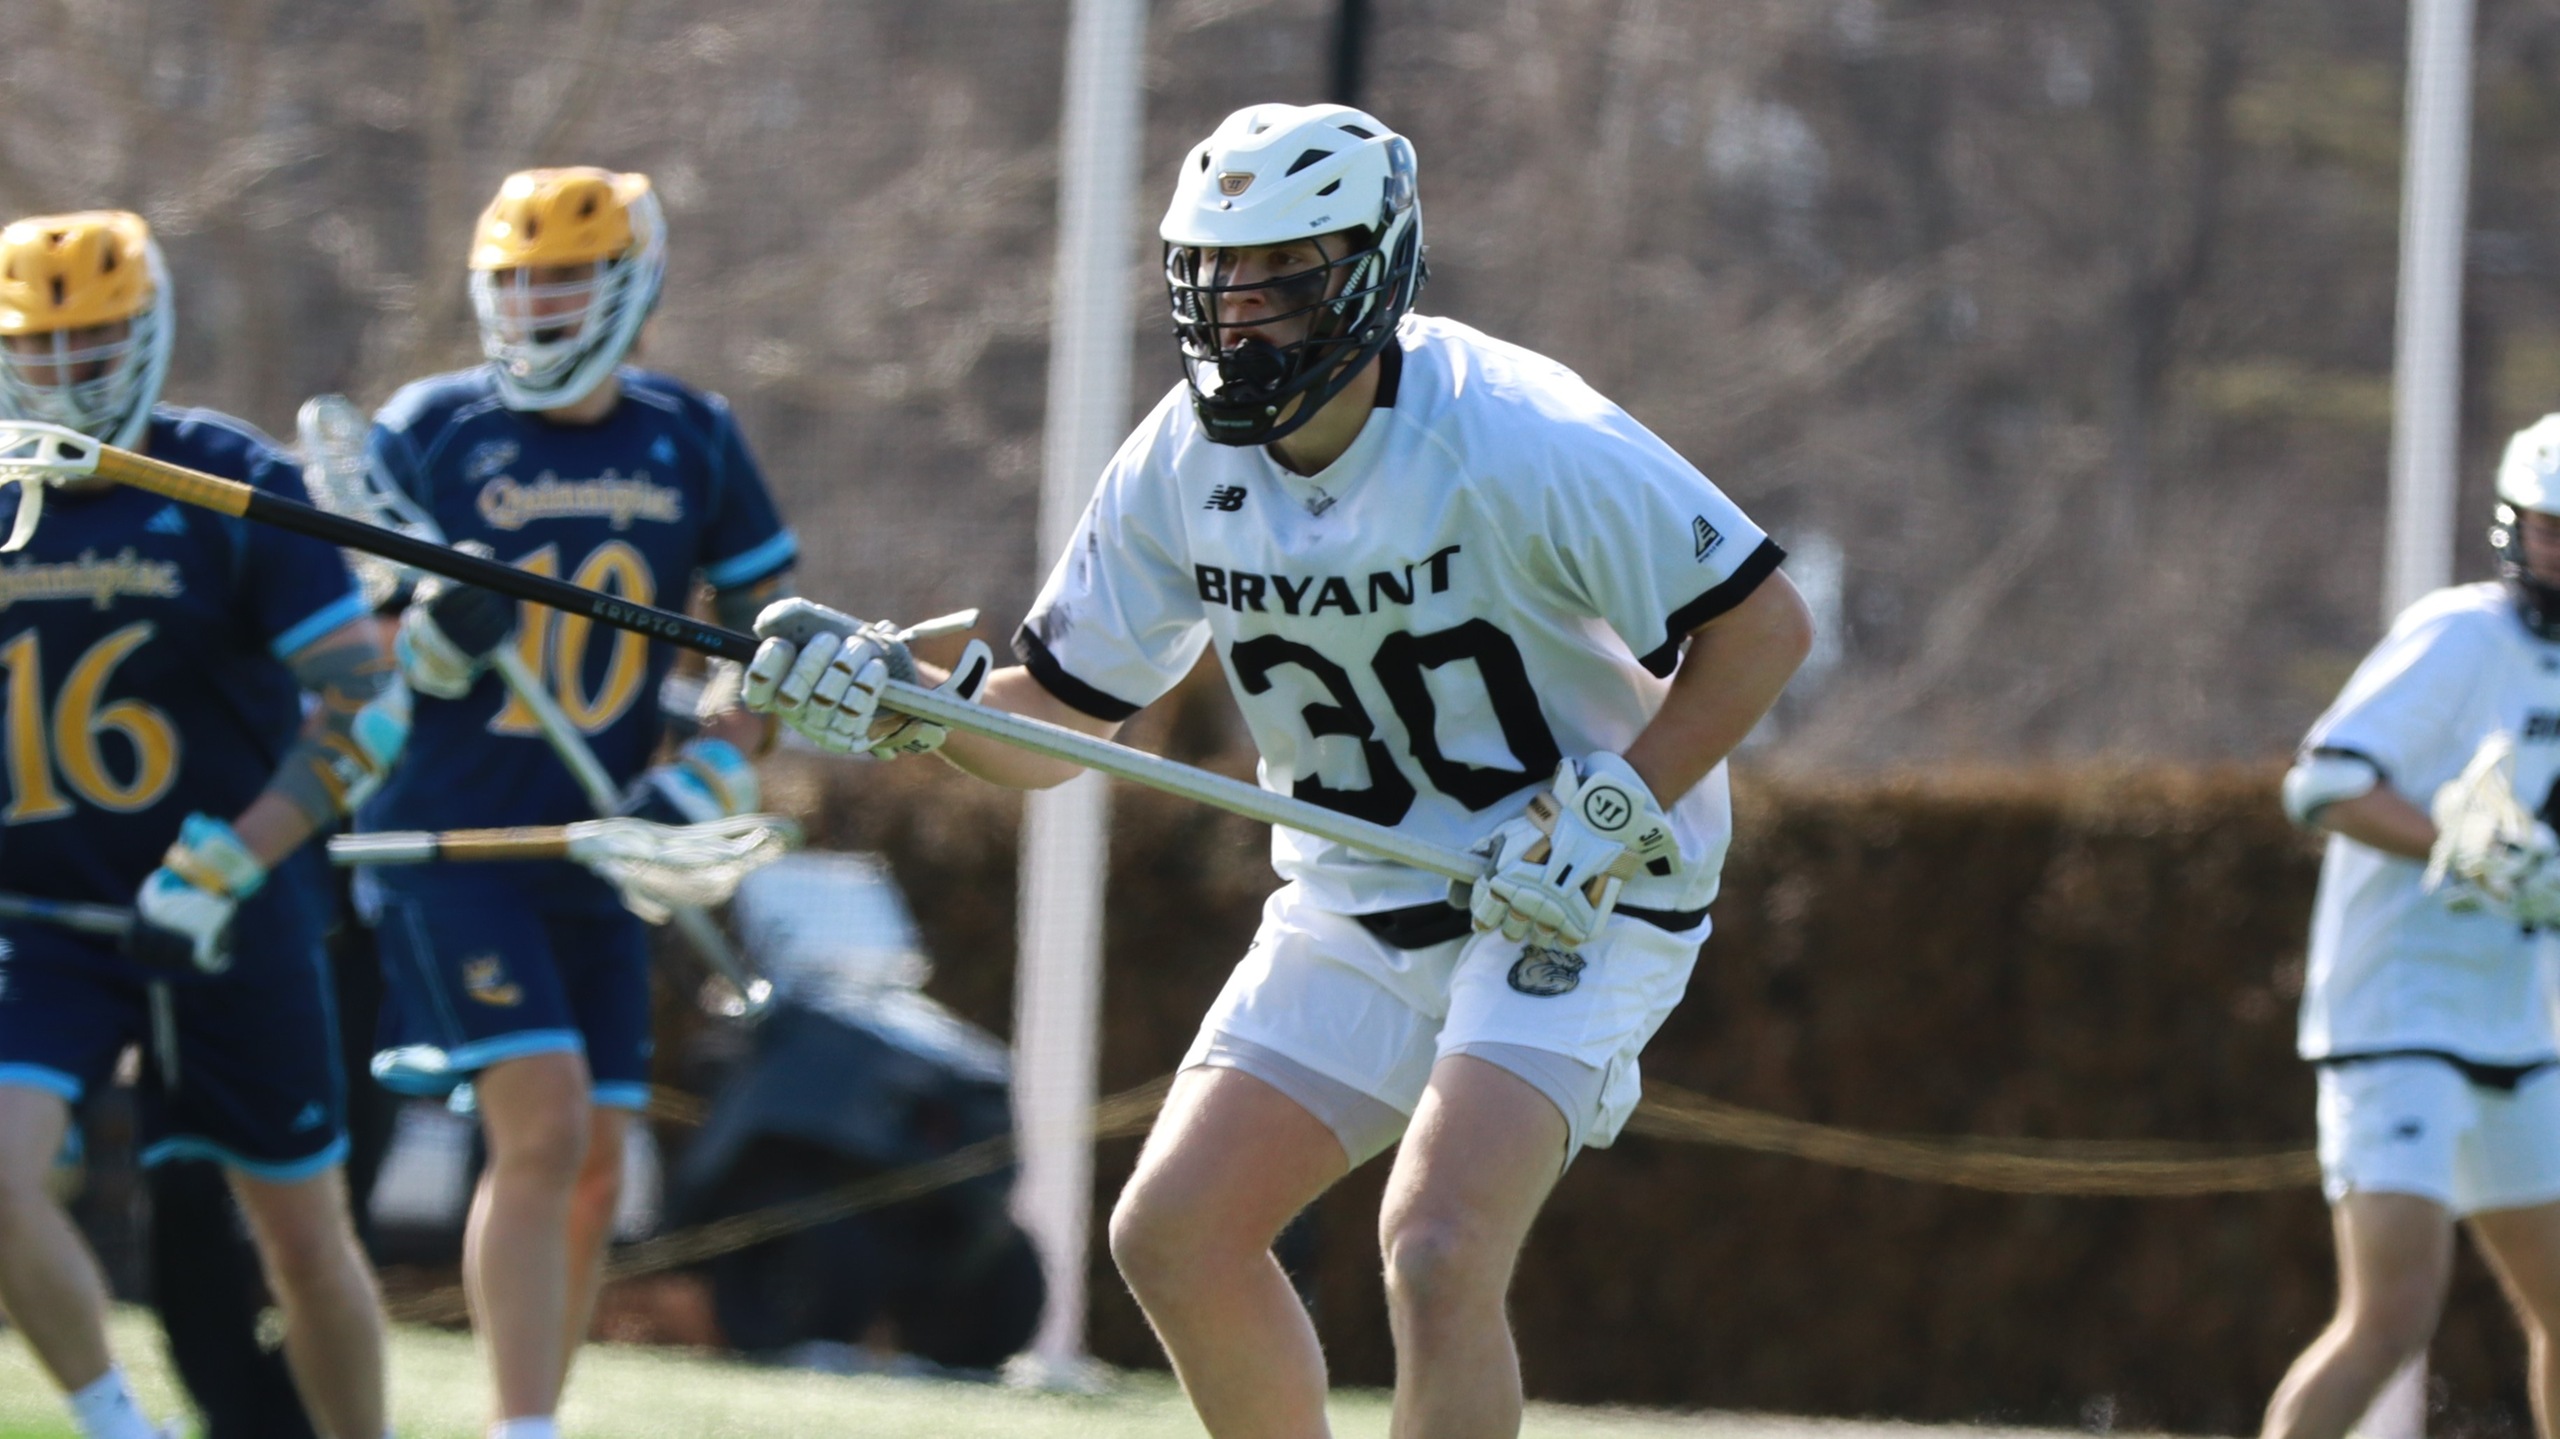 Bryant, UMass Lowell meet for Saturday afternoon showdown